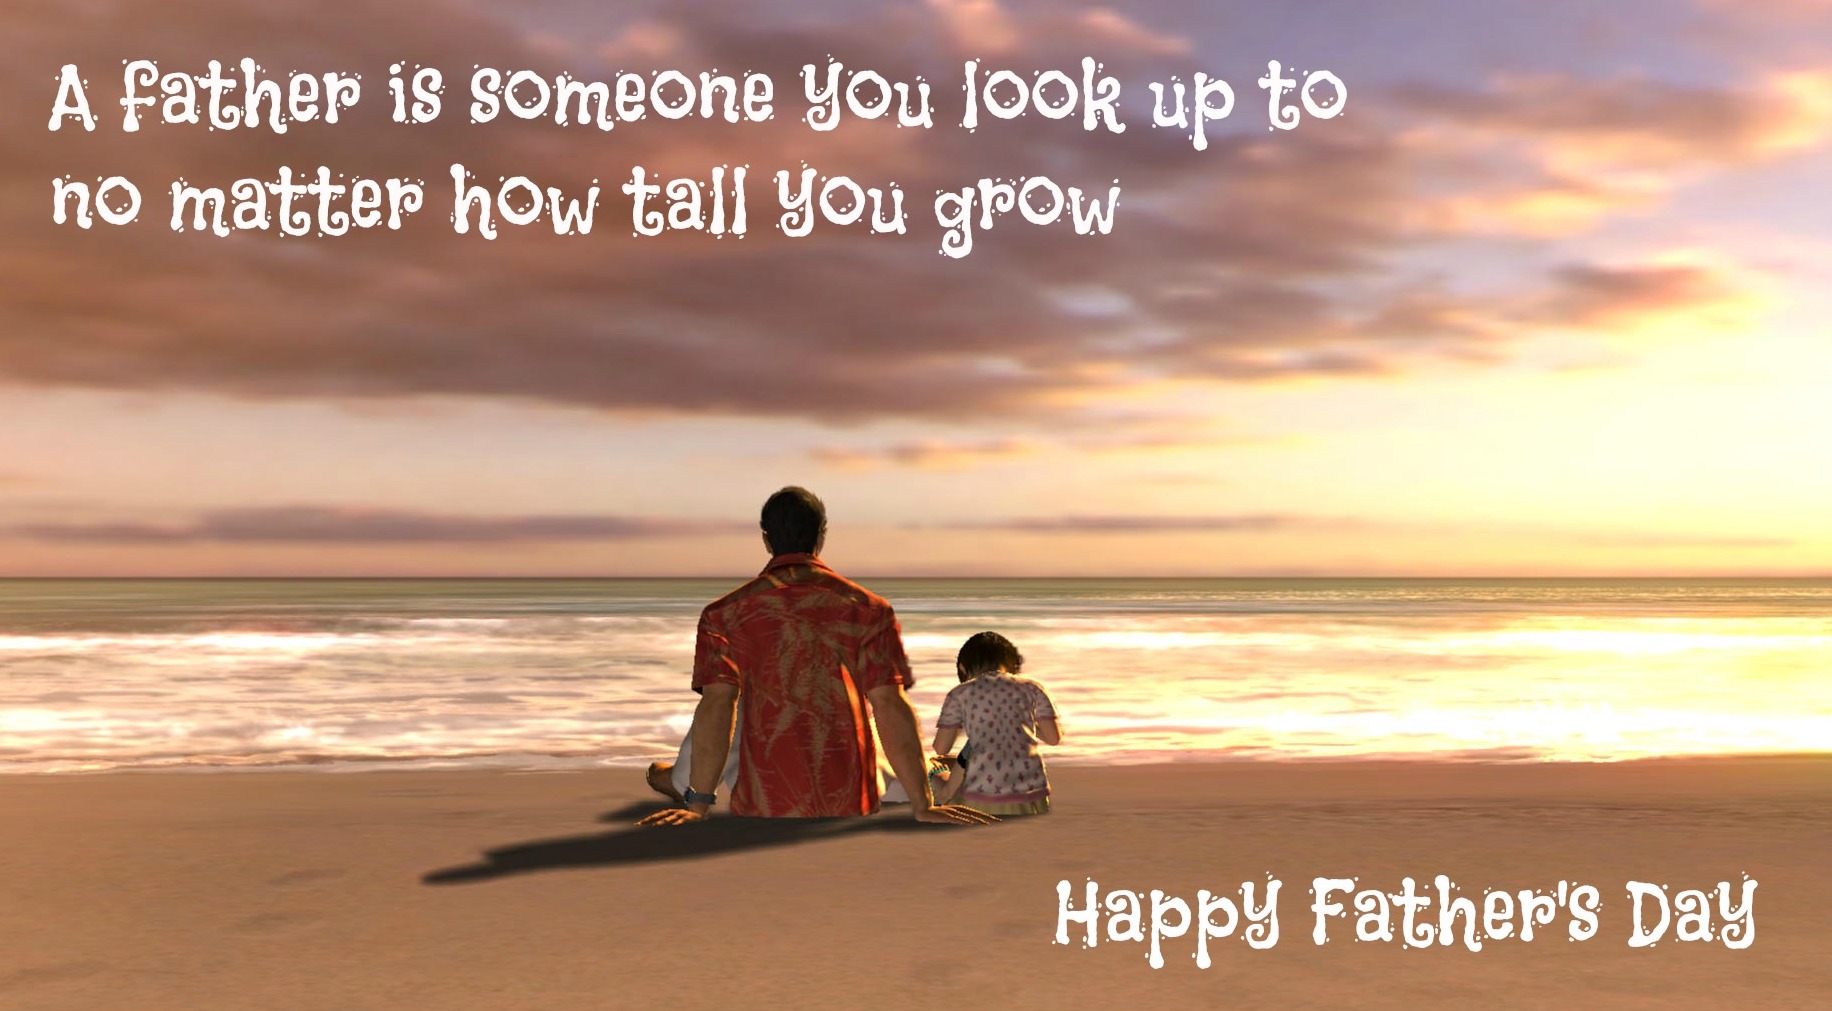 Father's Day greeting card collections, Father's Day greeting card messages, Father's Day wishes, Father's Day WhatsApp Stickers, a collection of Father's Day 2020 messages from sons and daughters, and many free downloads